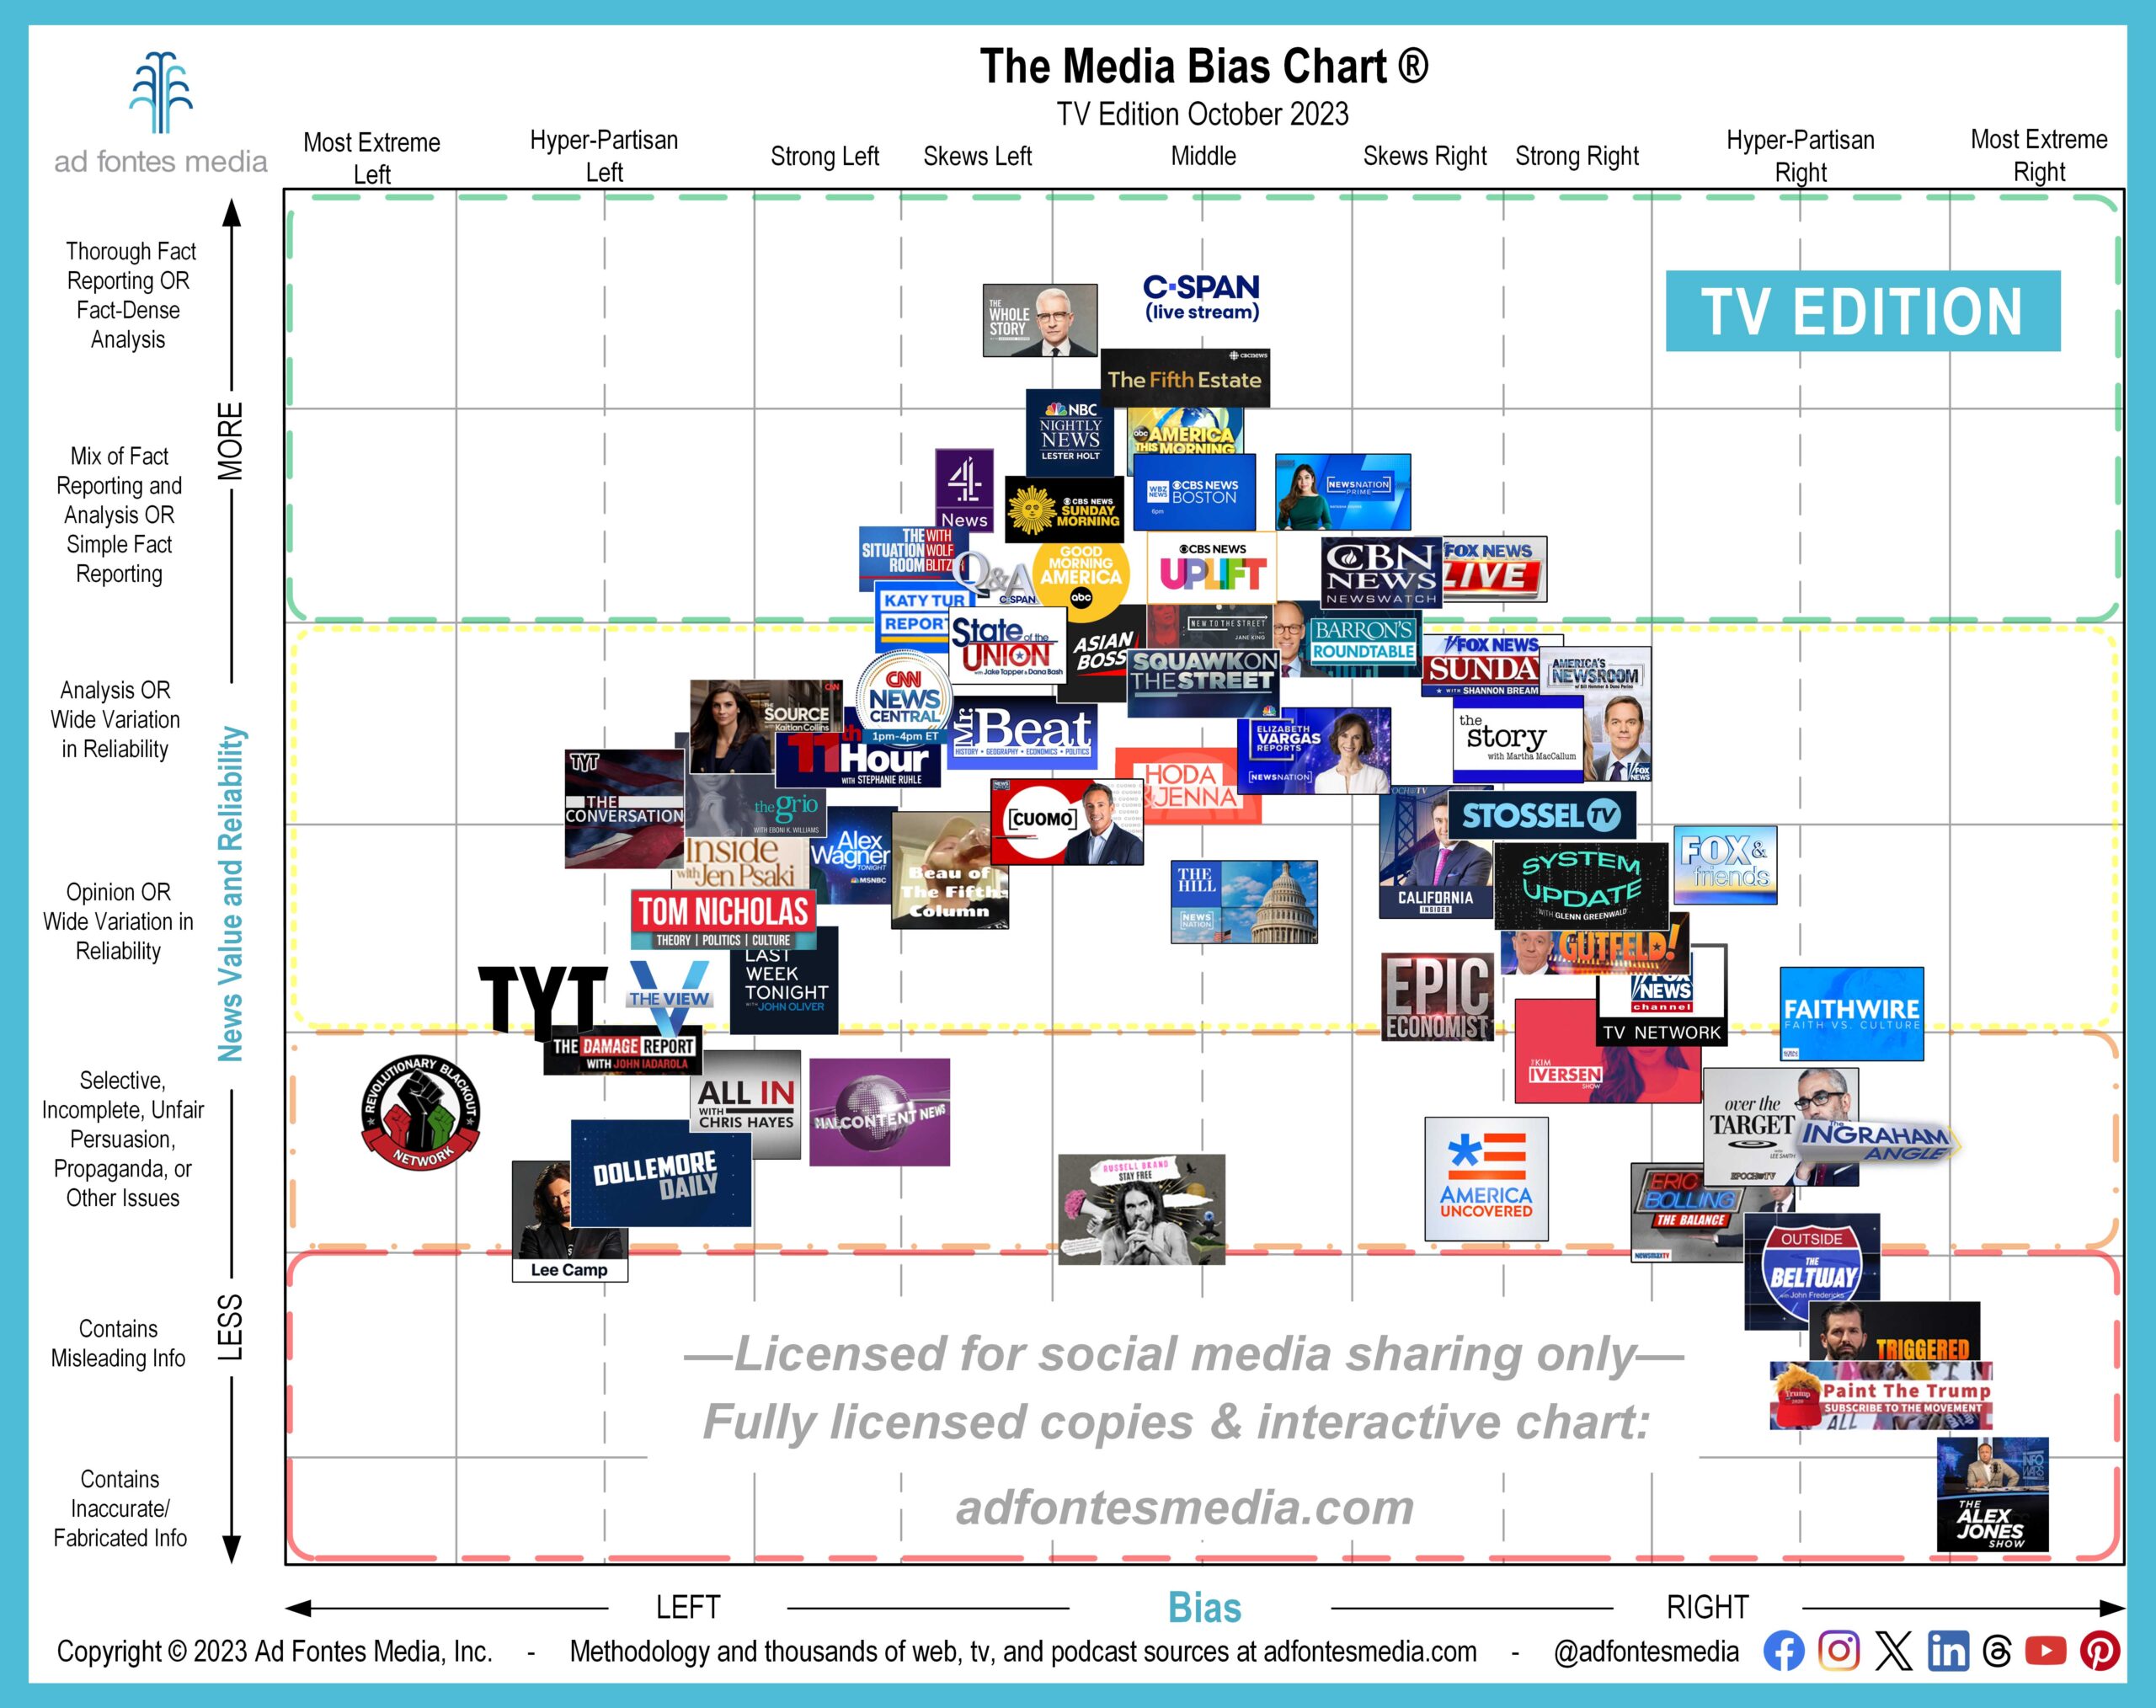 A Closer Look at 10 Shows Making Their Debuton October’s TV Edition of the Media Bias Chart